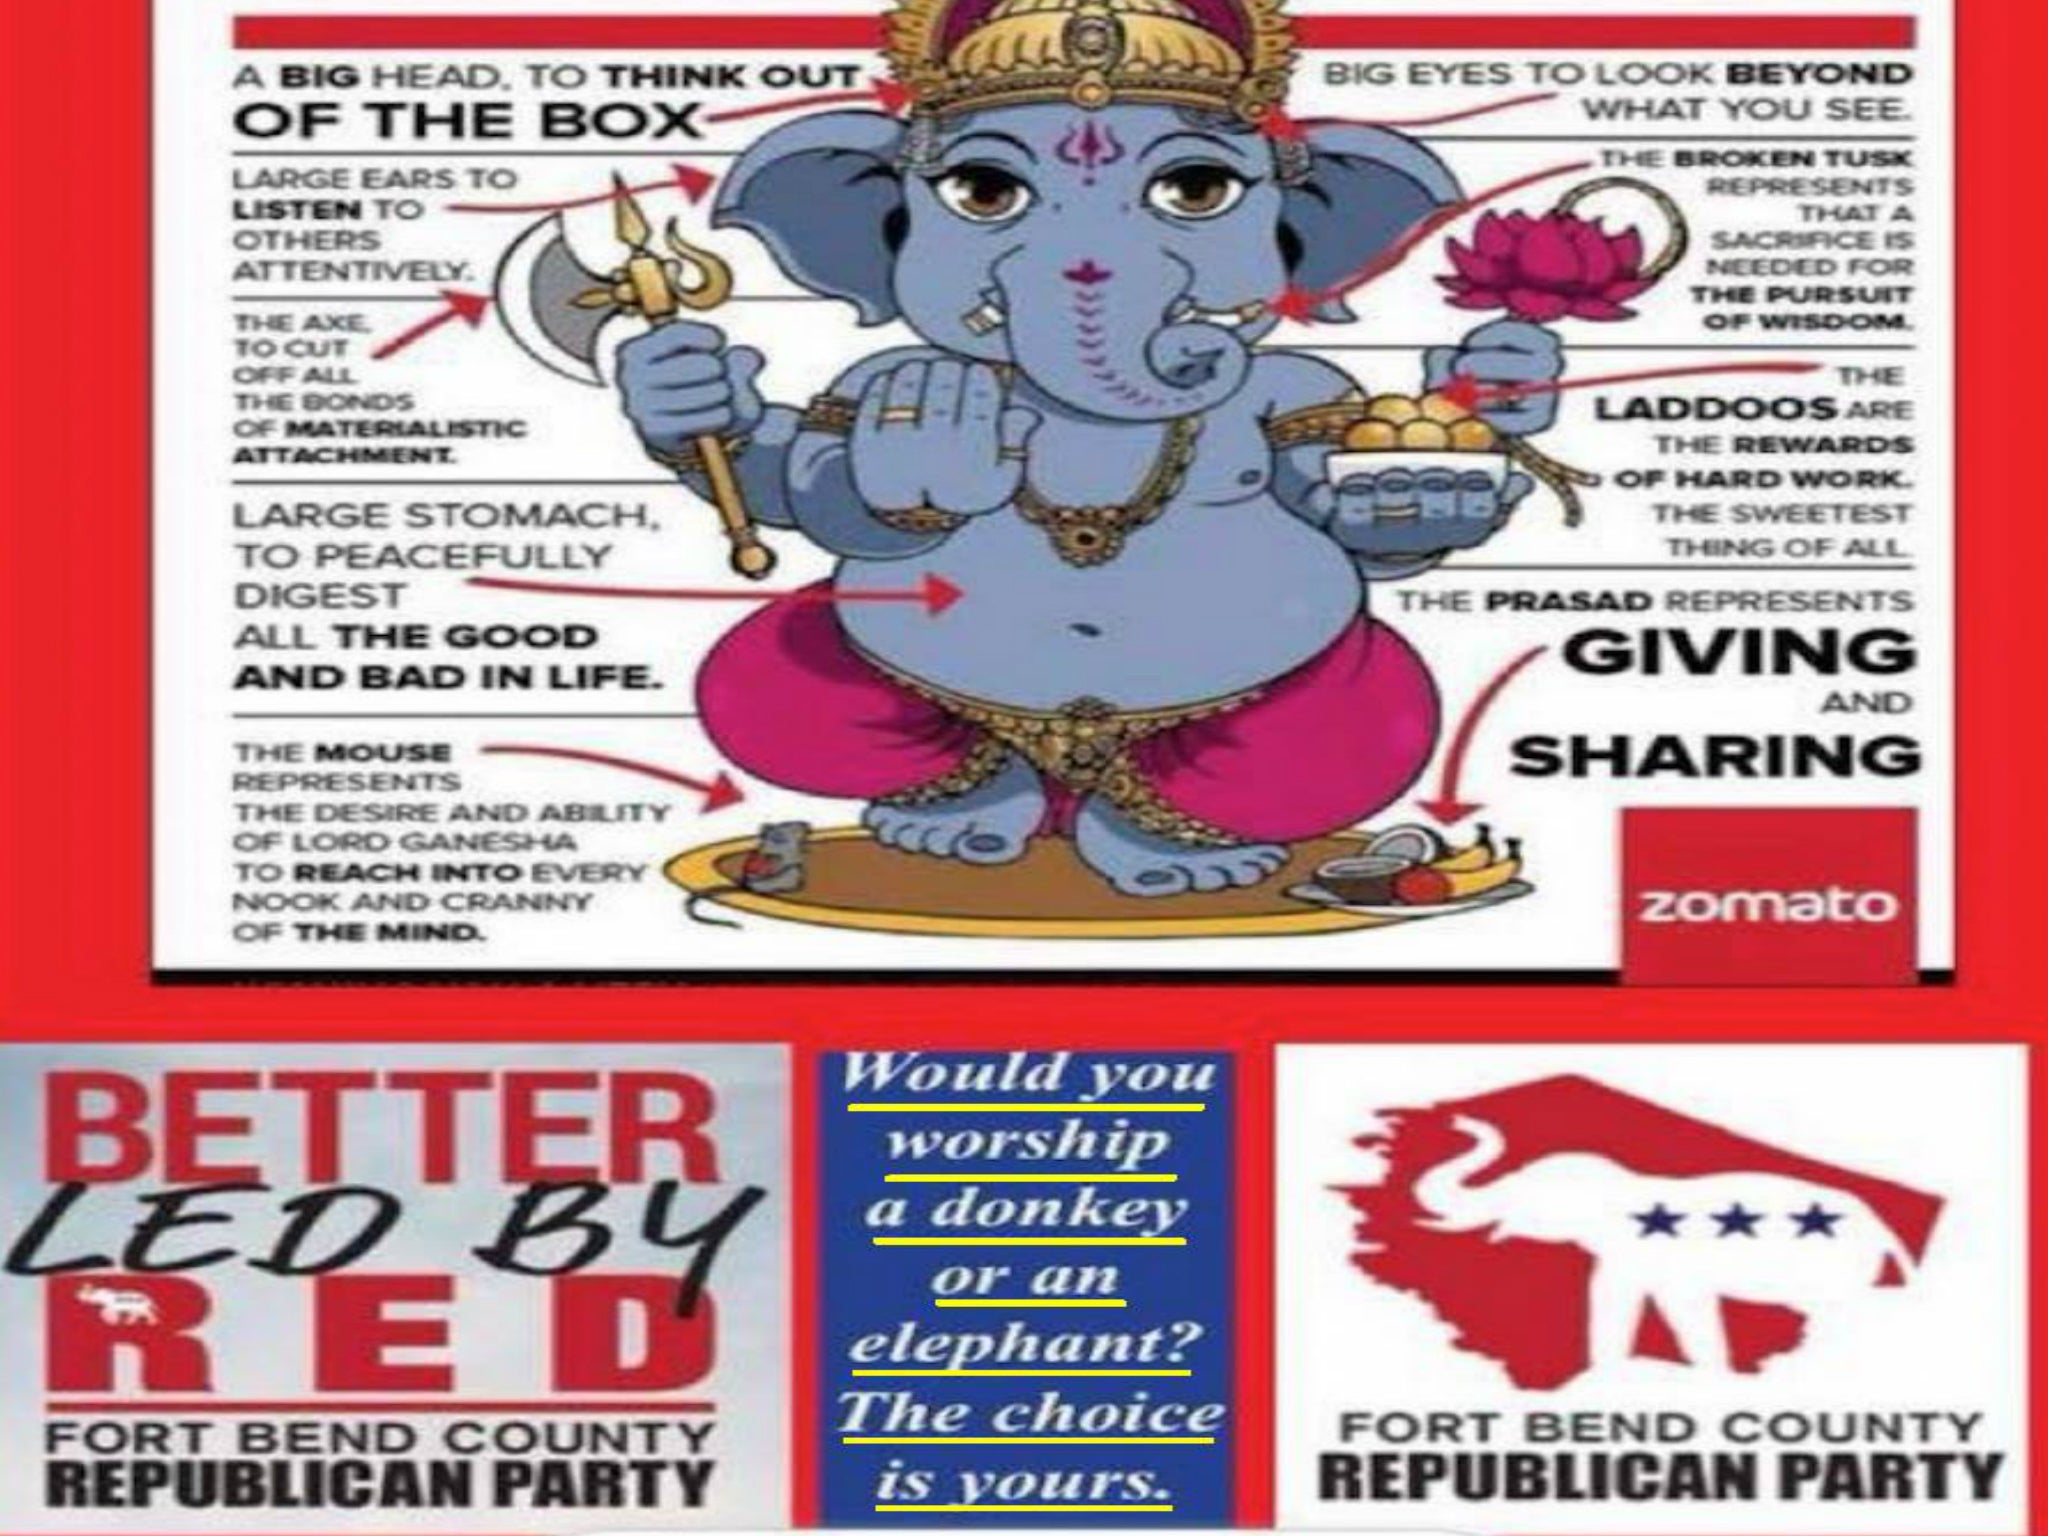 The Fort Bend County Republican party ran an advertisement in a local Indian community newspaper which many voters found offensive